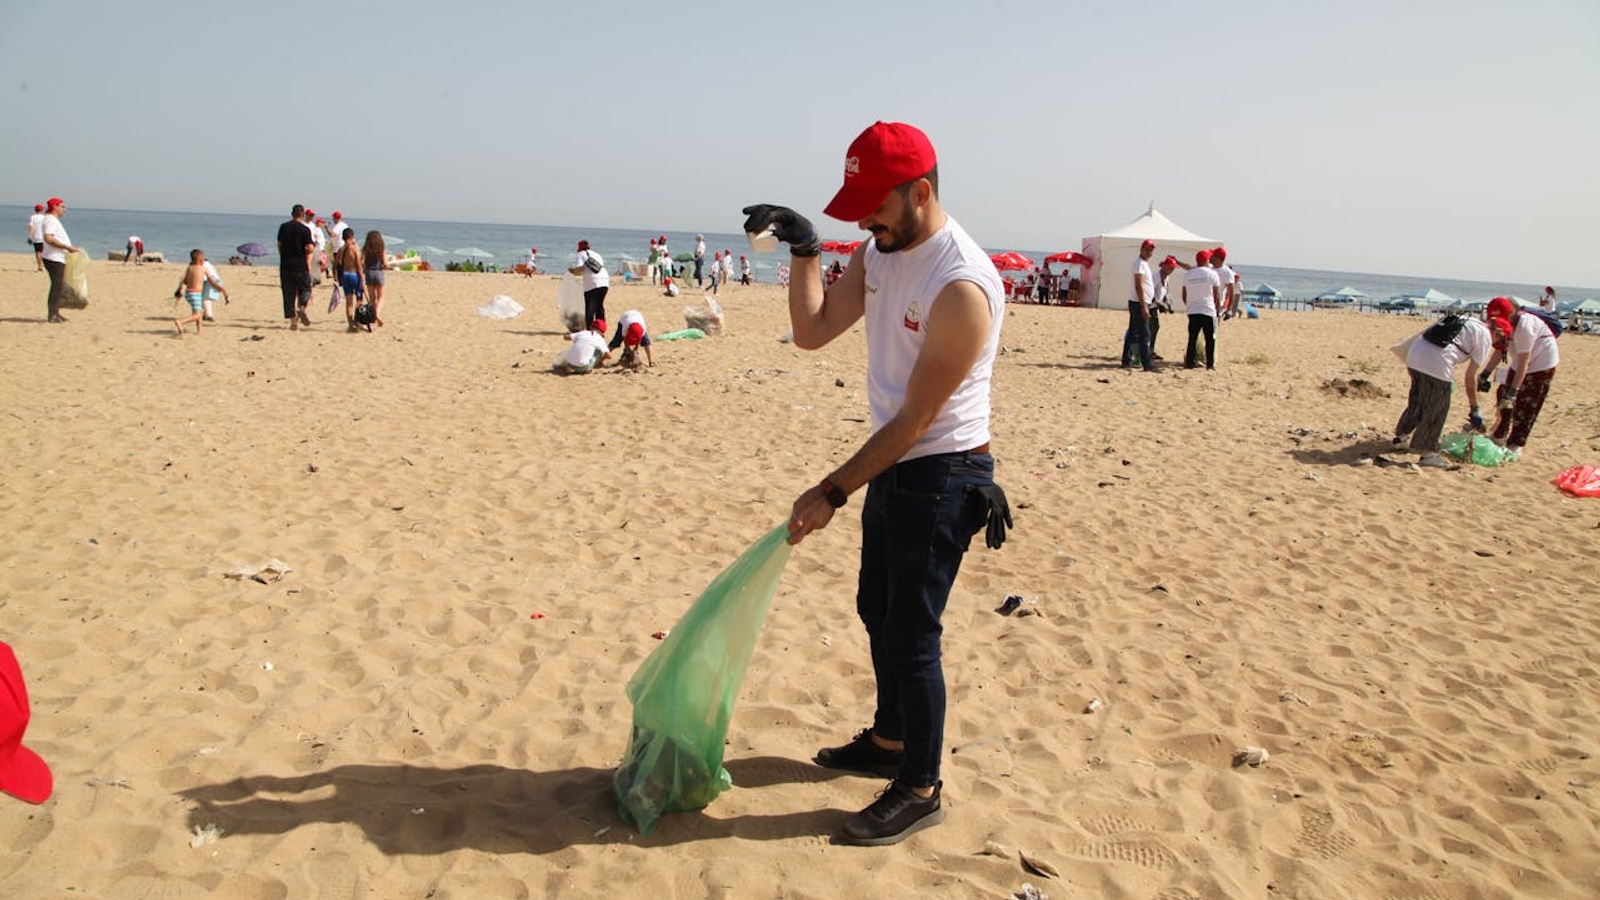 A man on a beach cleaning up rubbish into a plastic bag